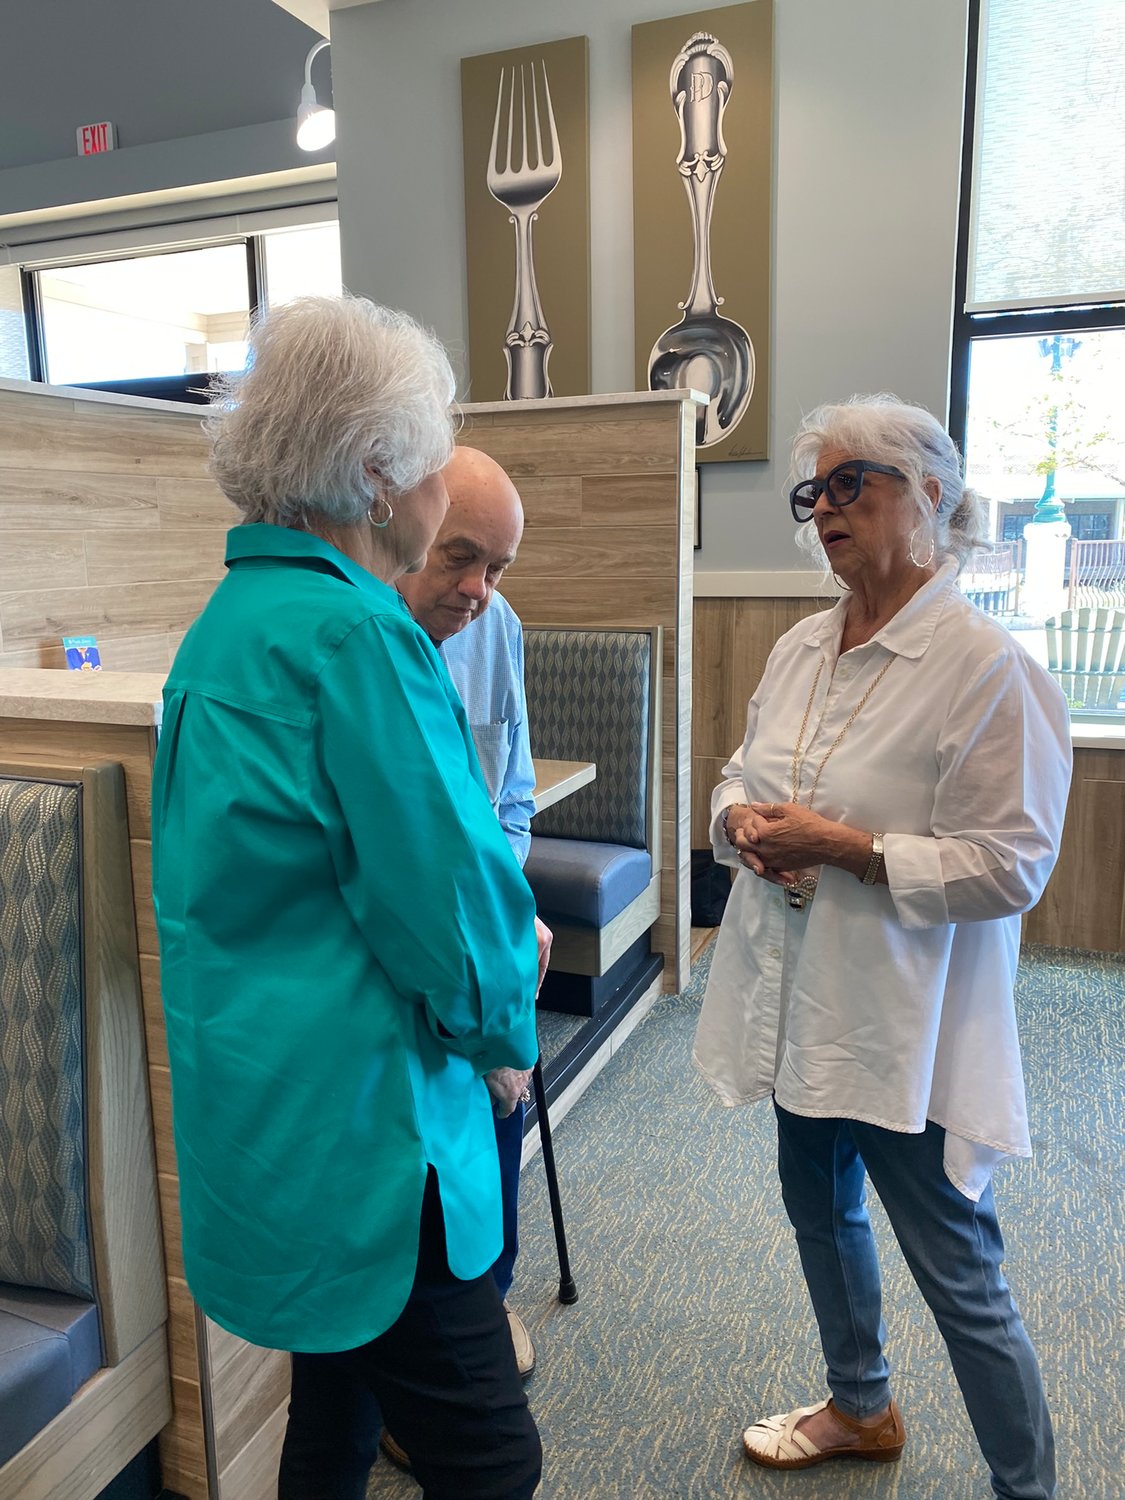 Paula Deen speaks with Linda and Dallas Brooks. Linda Brooks is vice-chair of the Creek Indian Enterprises Development Authority.